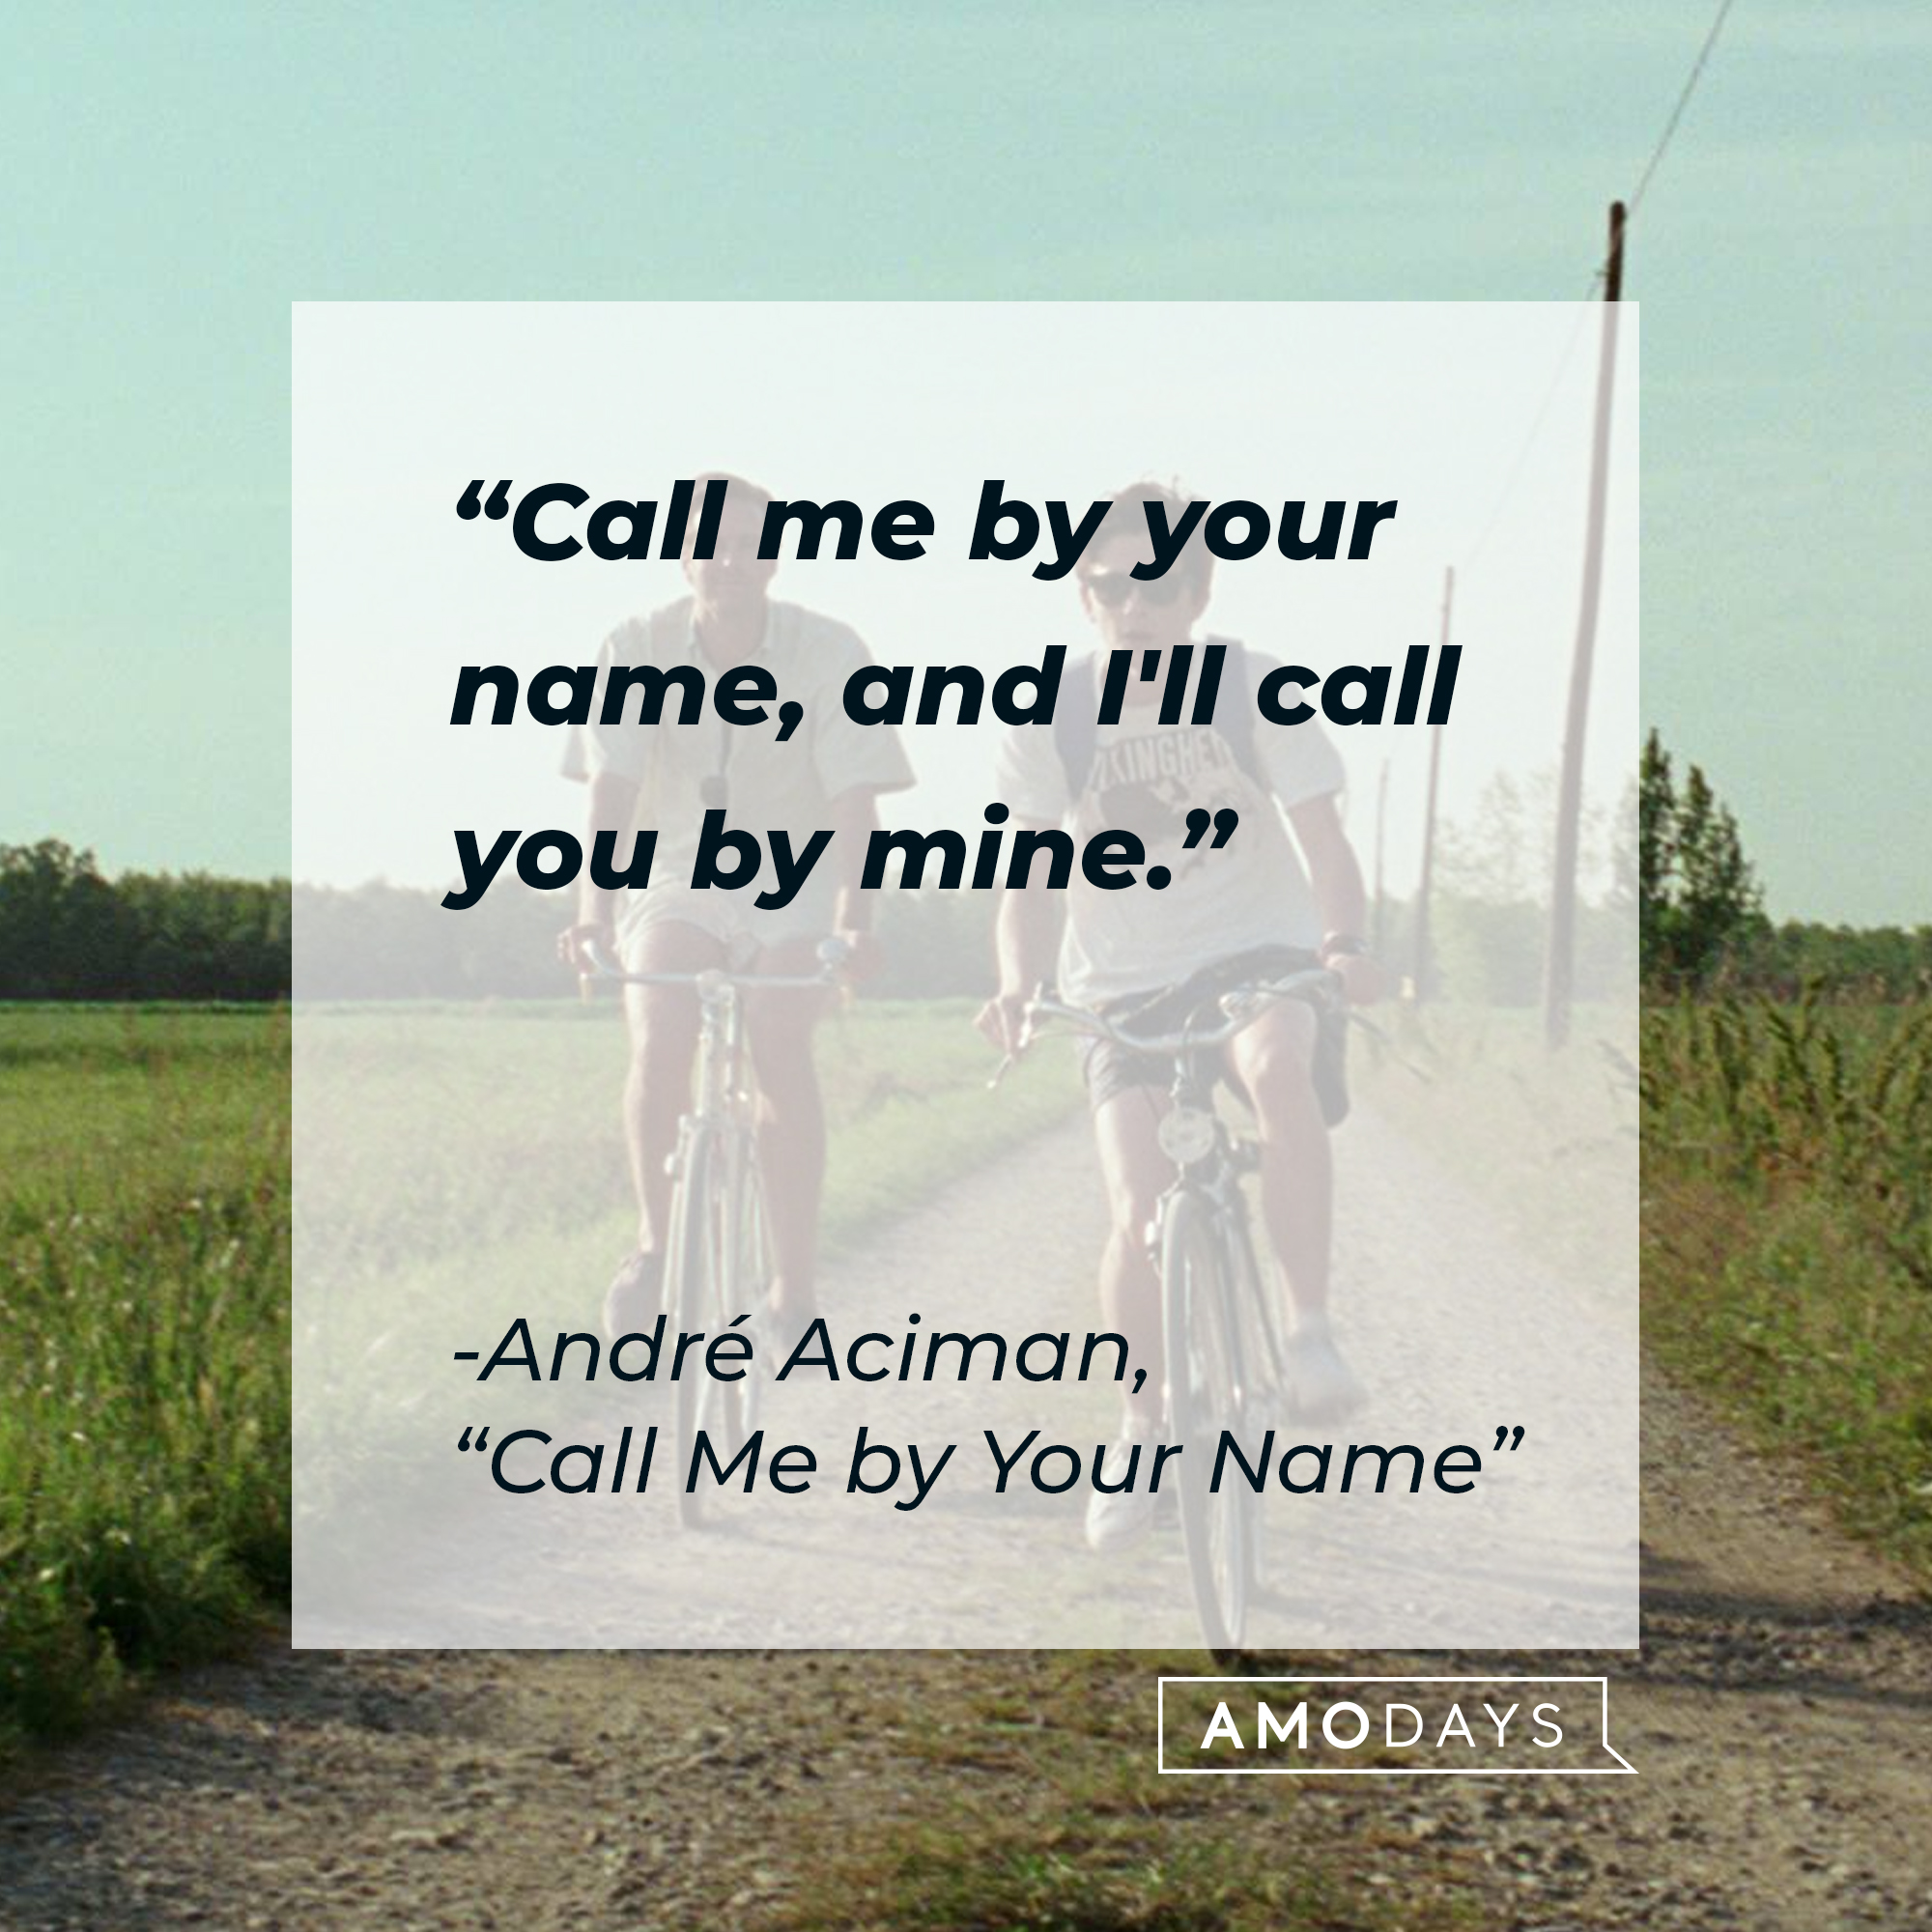 Characters Elio and Oliver from the film “Call Me By Your Name,” with a quote by the author, André Aciman, from the book it’s based on: “Call me by your name and I'll call you by mine.” | Source: Facebook.com/CallMeByYourNameFilm